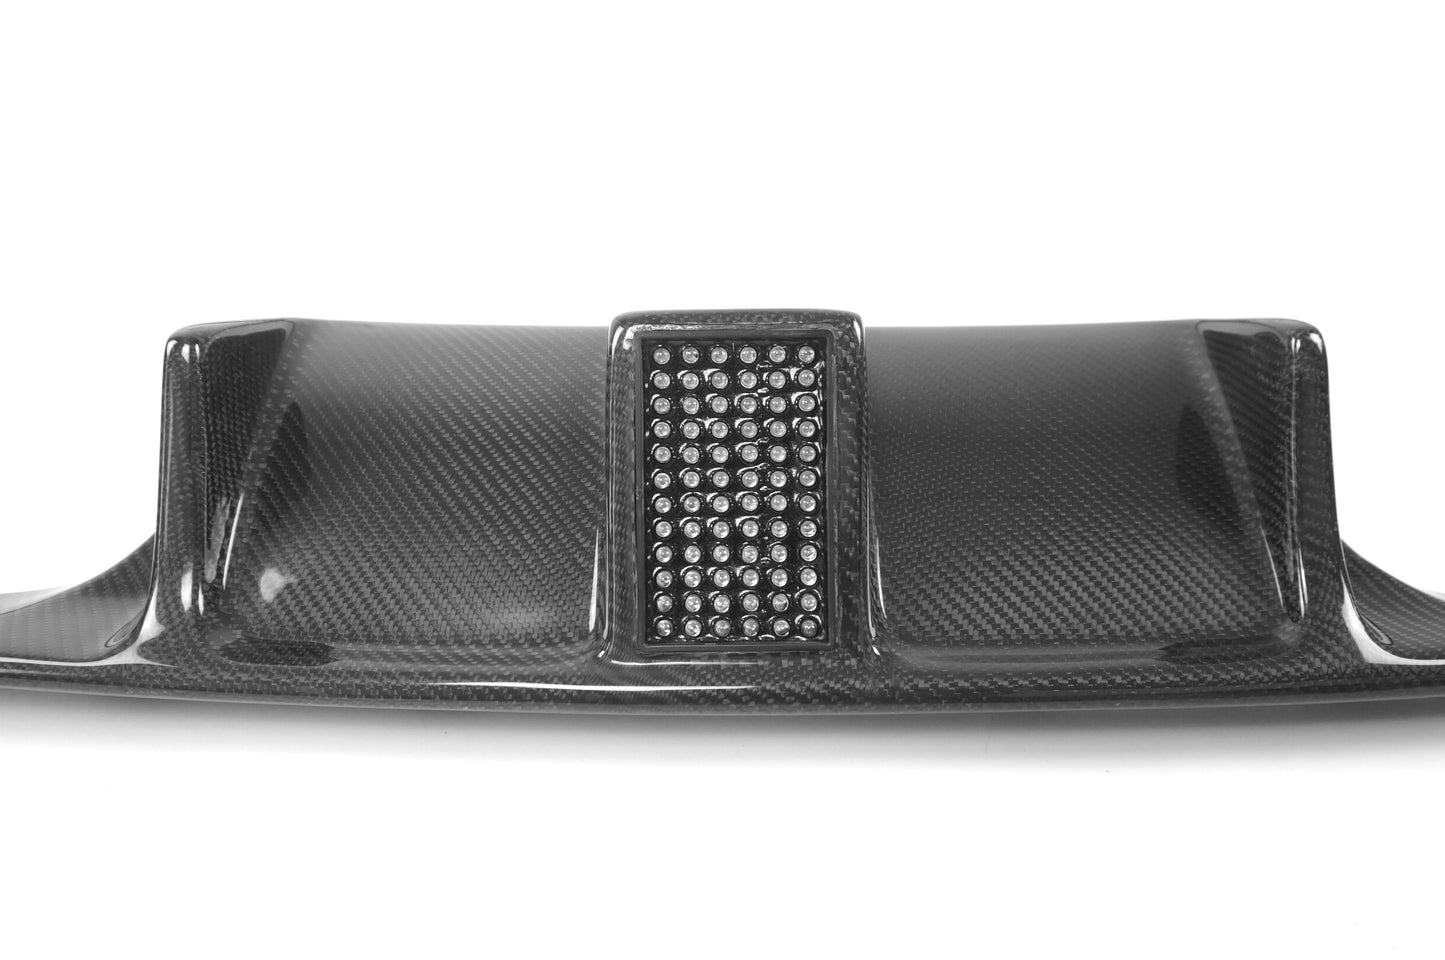 F8X "K Style" Carbon Fiber rear diffuser- 1 Piece - WITH LED